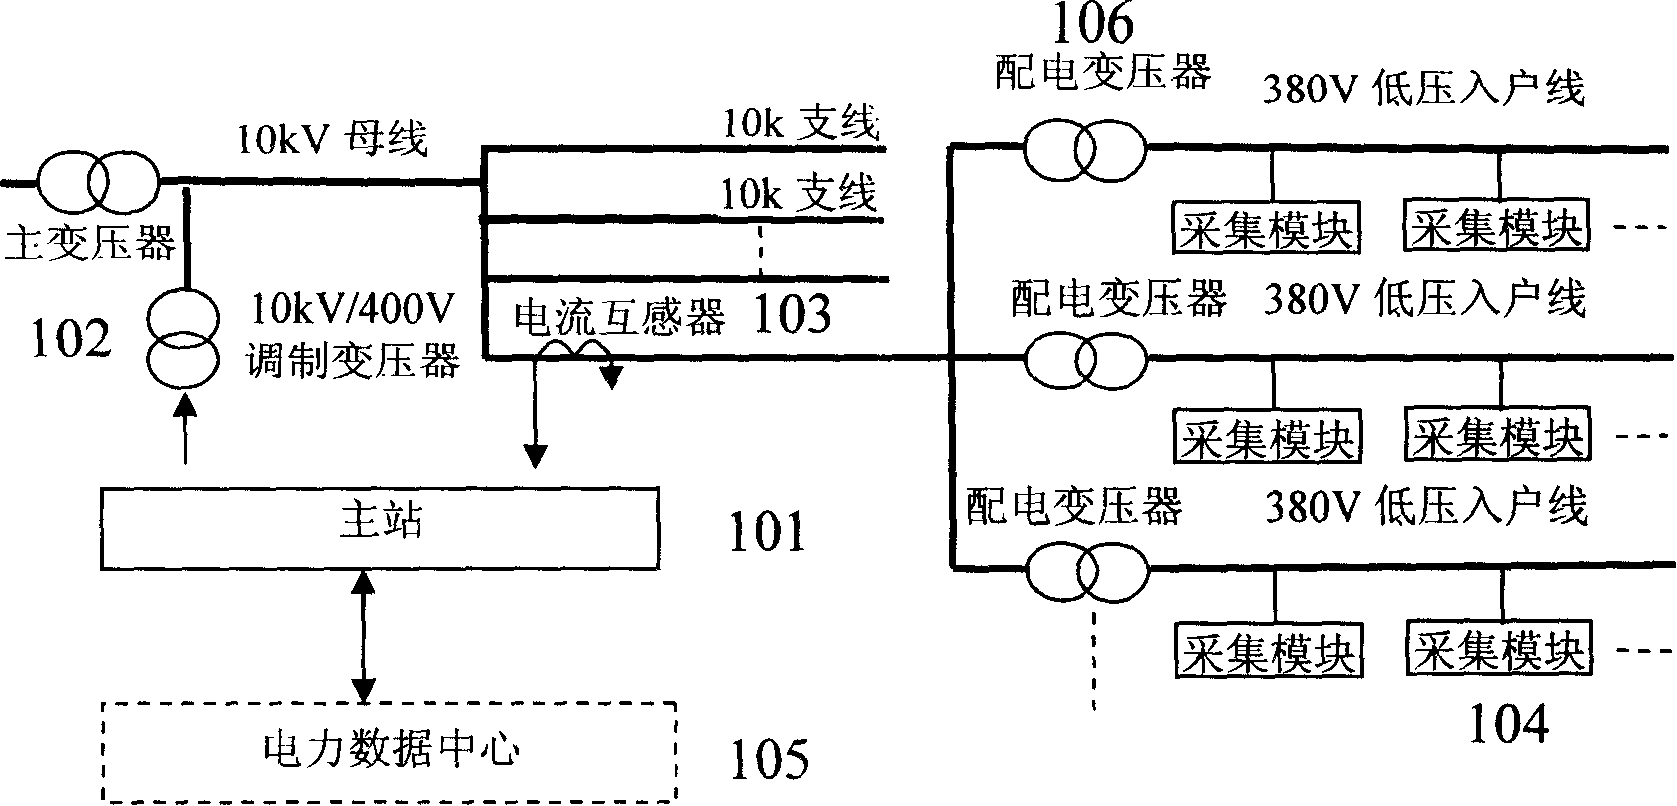 Power frequency electric power data transfer system